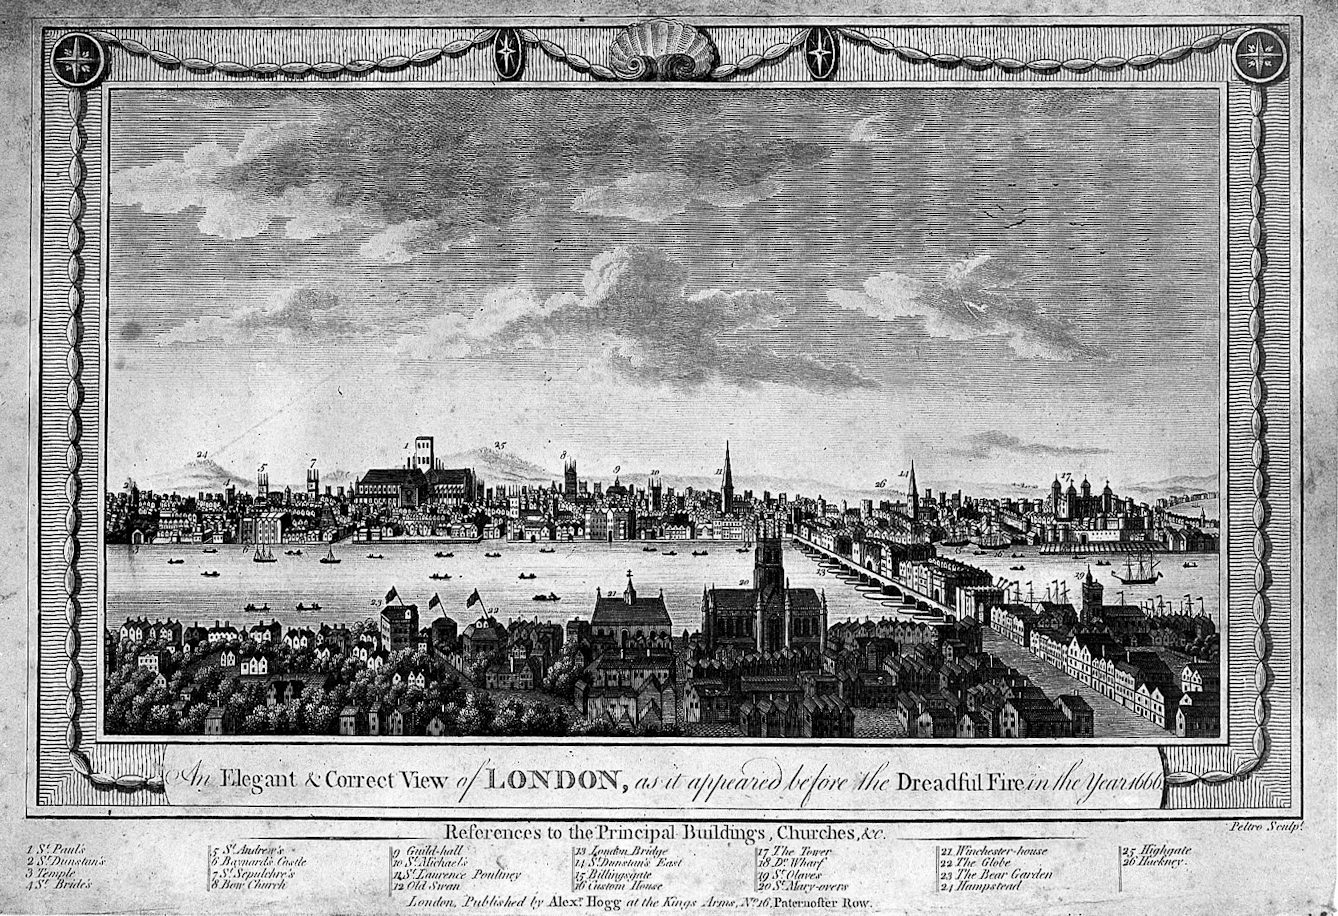 Black and white etching of London in 1666 before the Great Fire, showing a bridge to the right and with various landmarks such as the old St Paul's Cathedral in the centre background. 